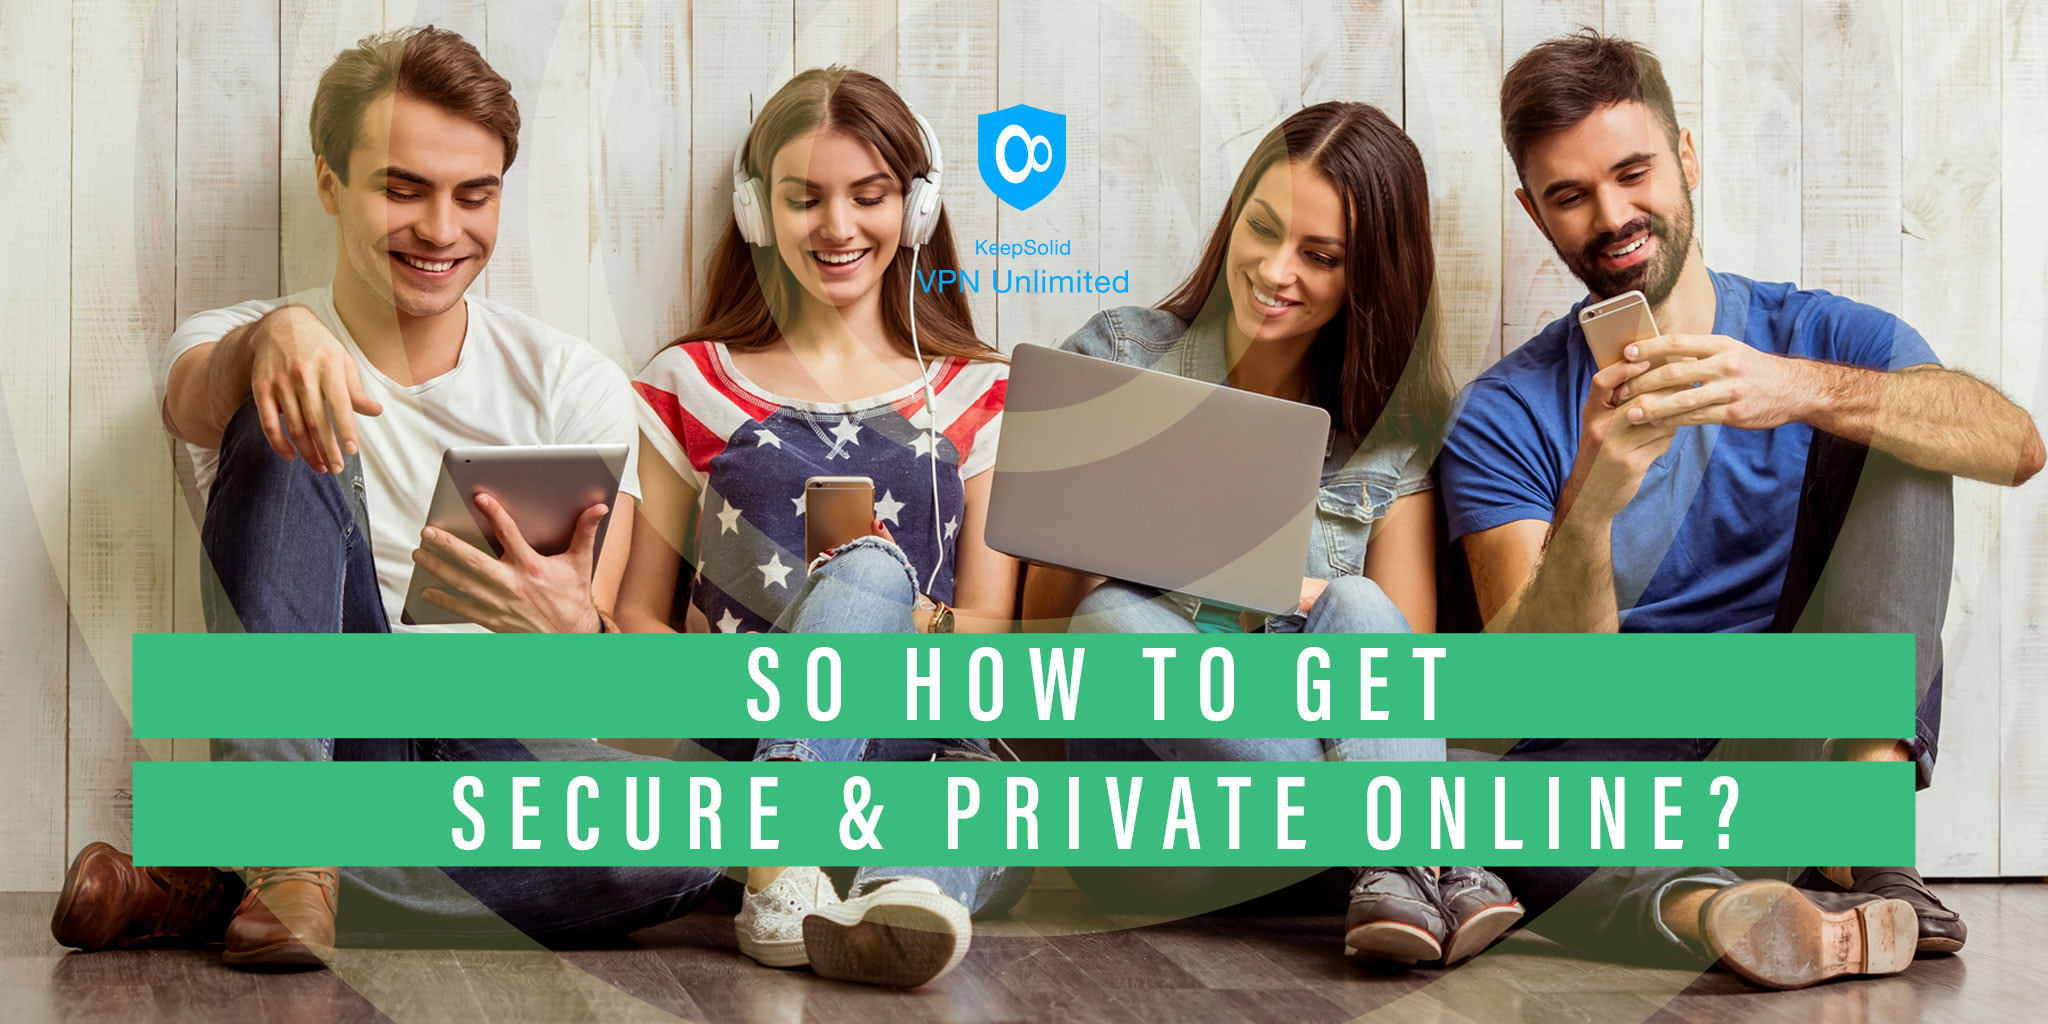 Young people browsing the web securely and privately with KeepSolid VPN Unlimited